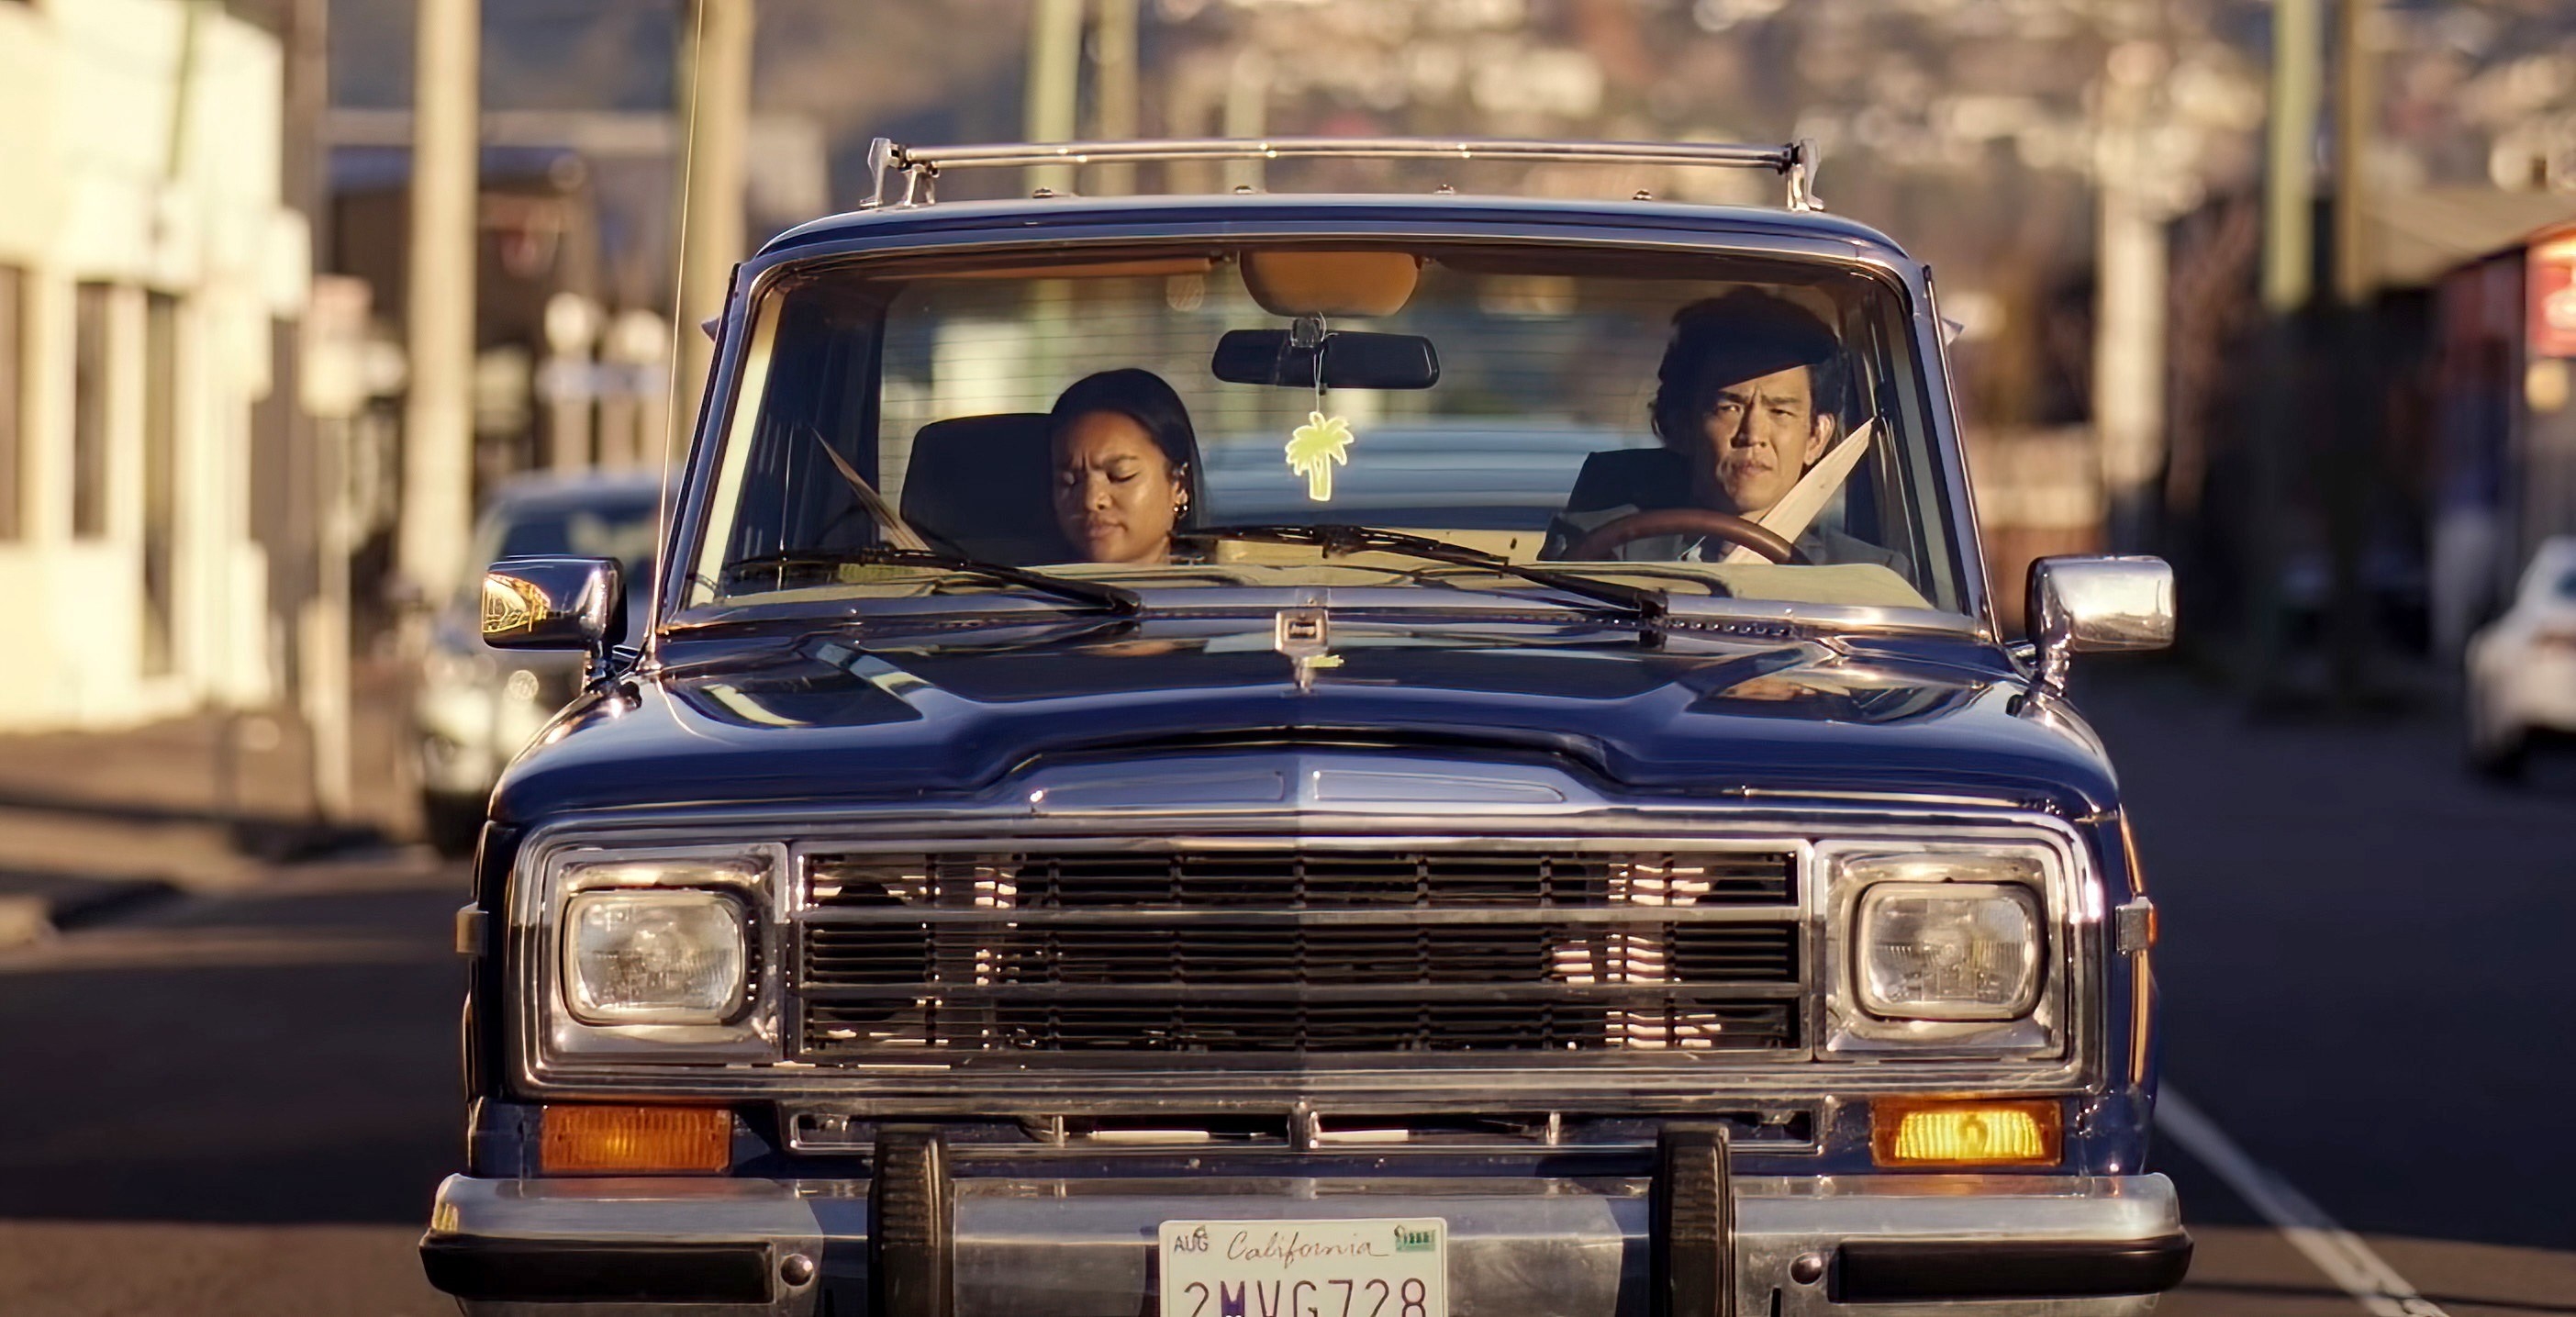 Mia Isaac and John Cho ride in a car together